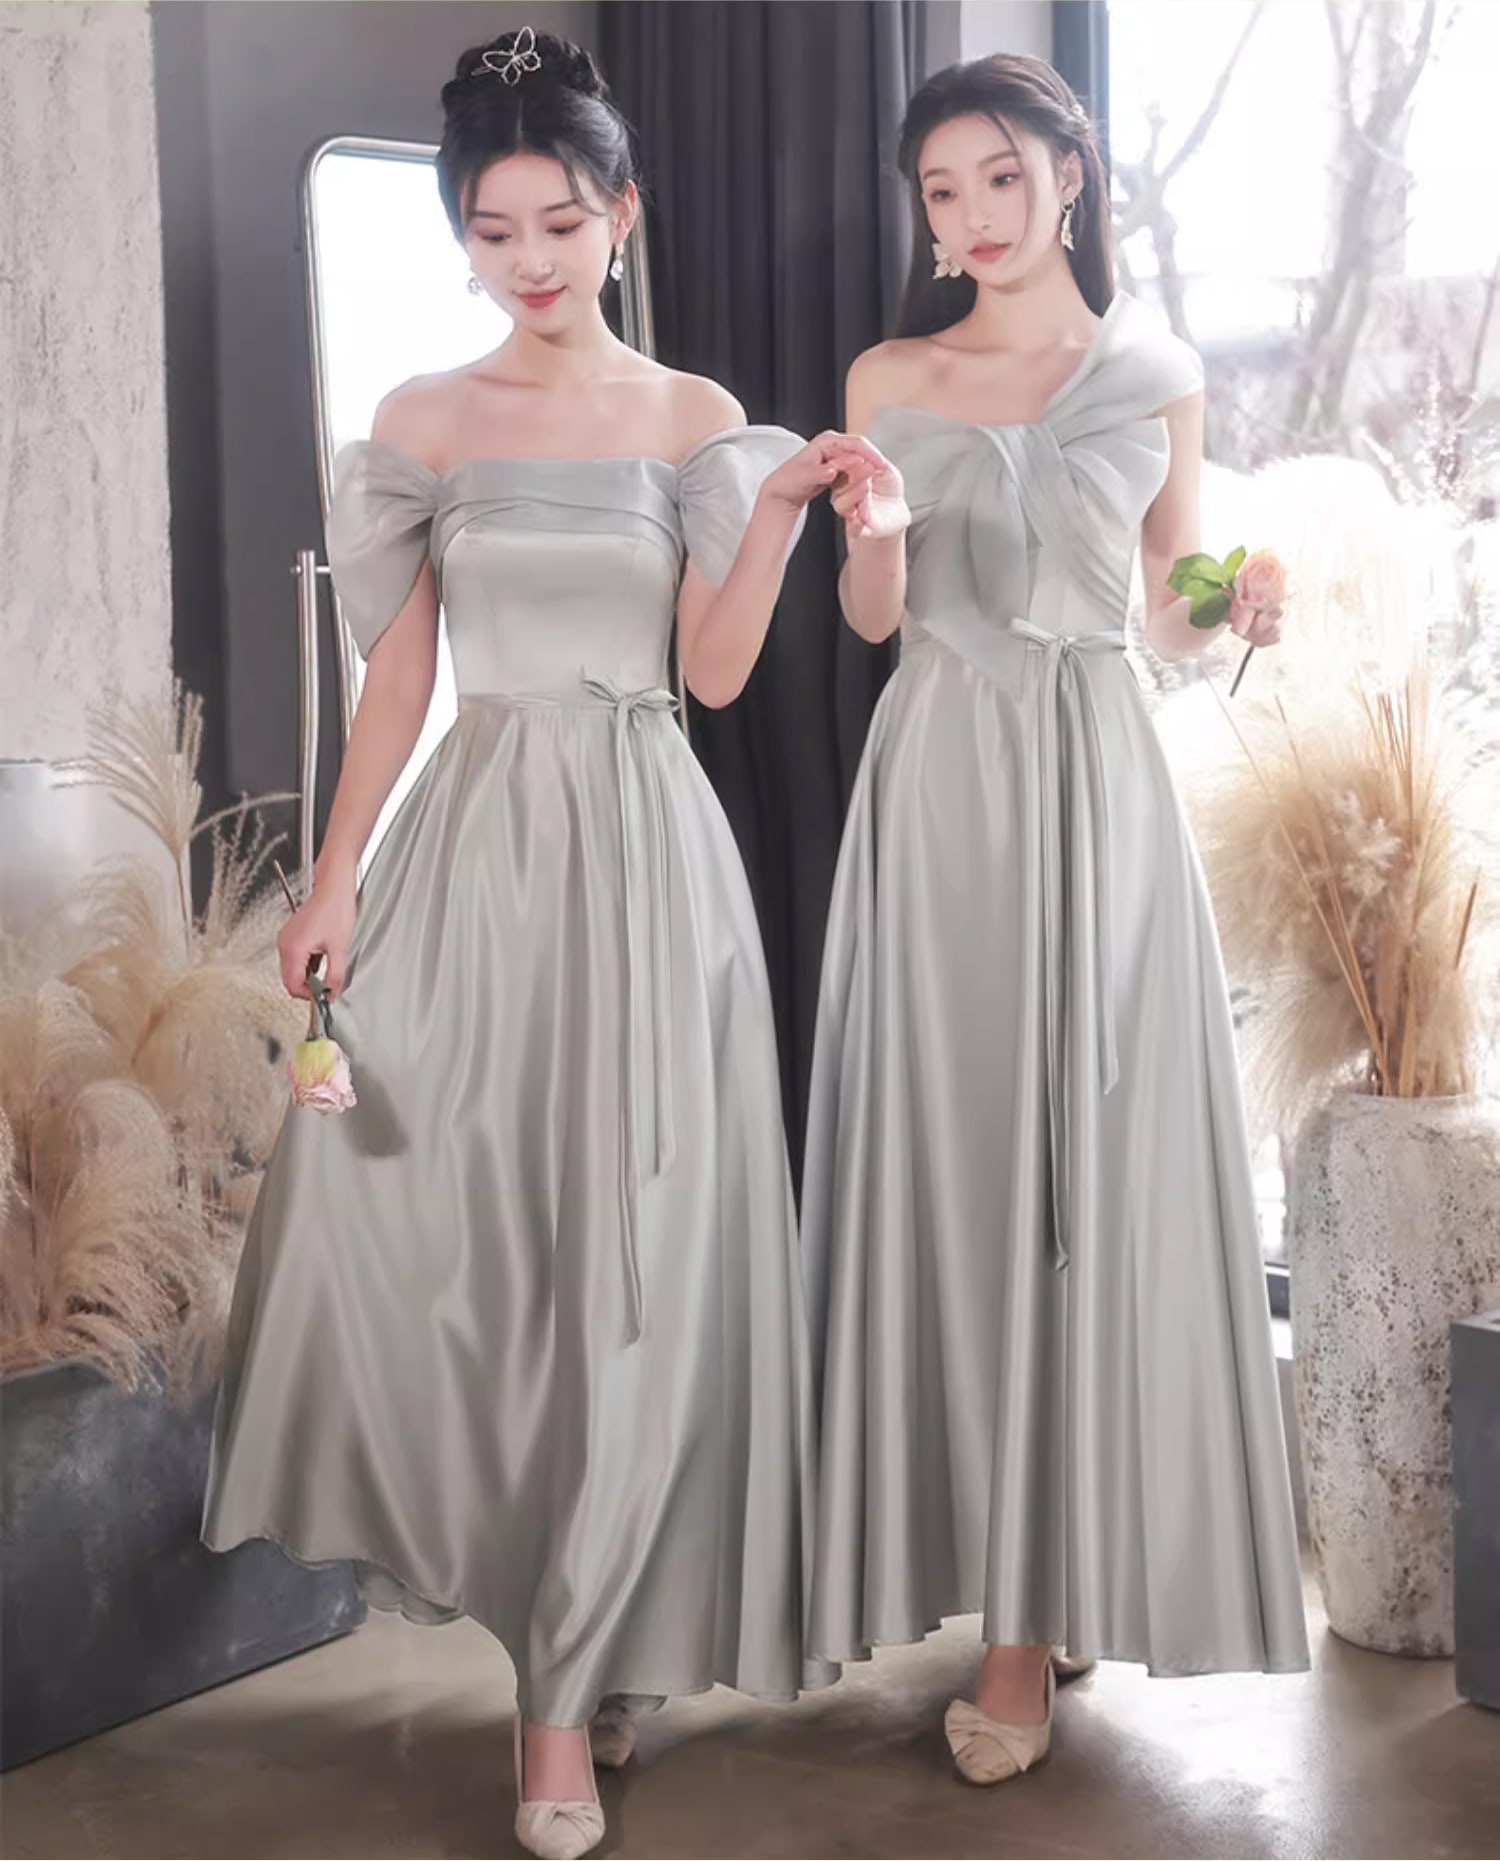 Simple-Gray-Satin-Bridesmaid-Dress-Sweet-Casual-Party-Ball-Gown12